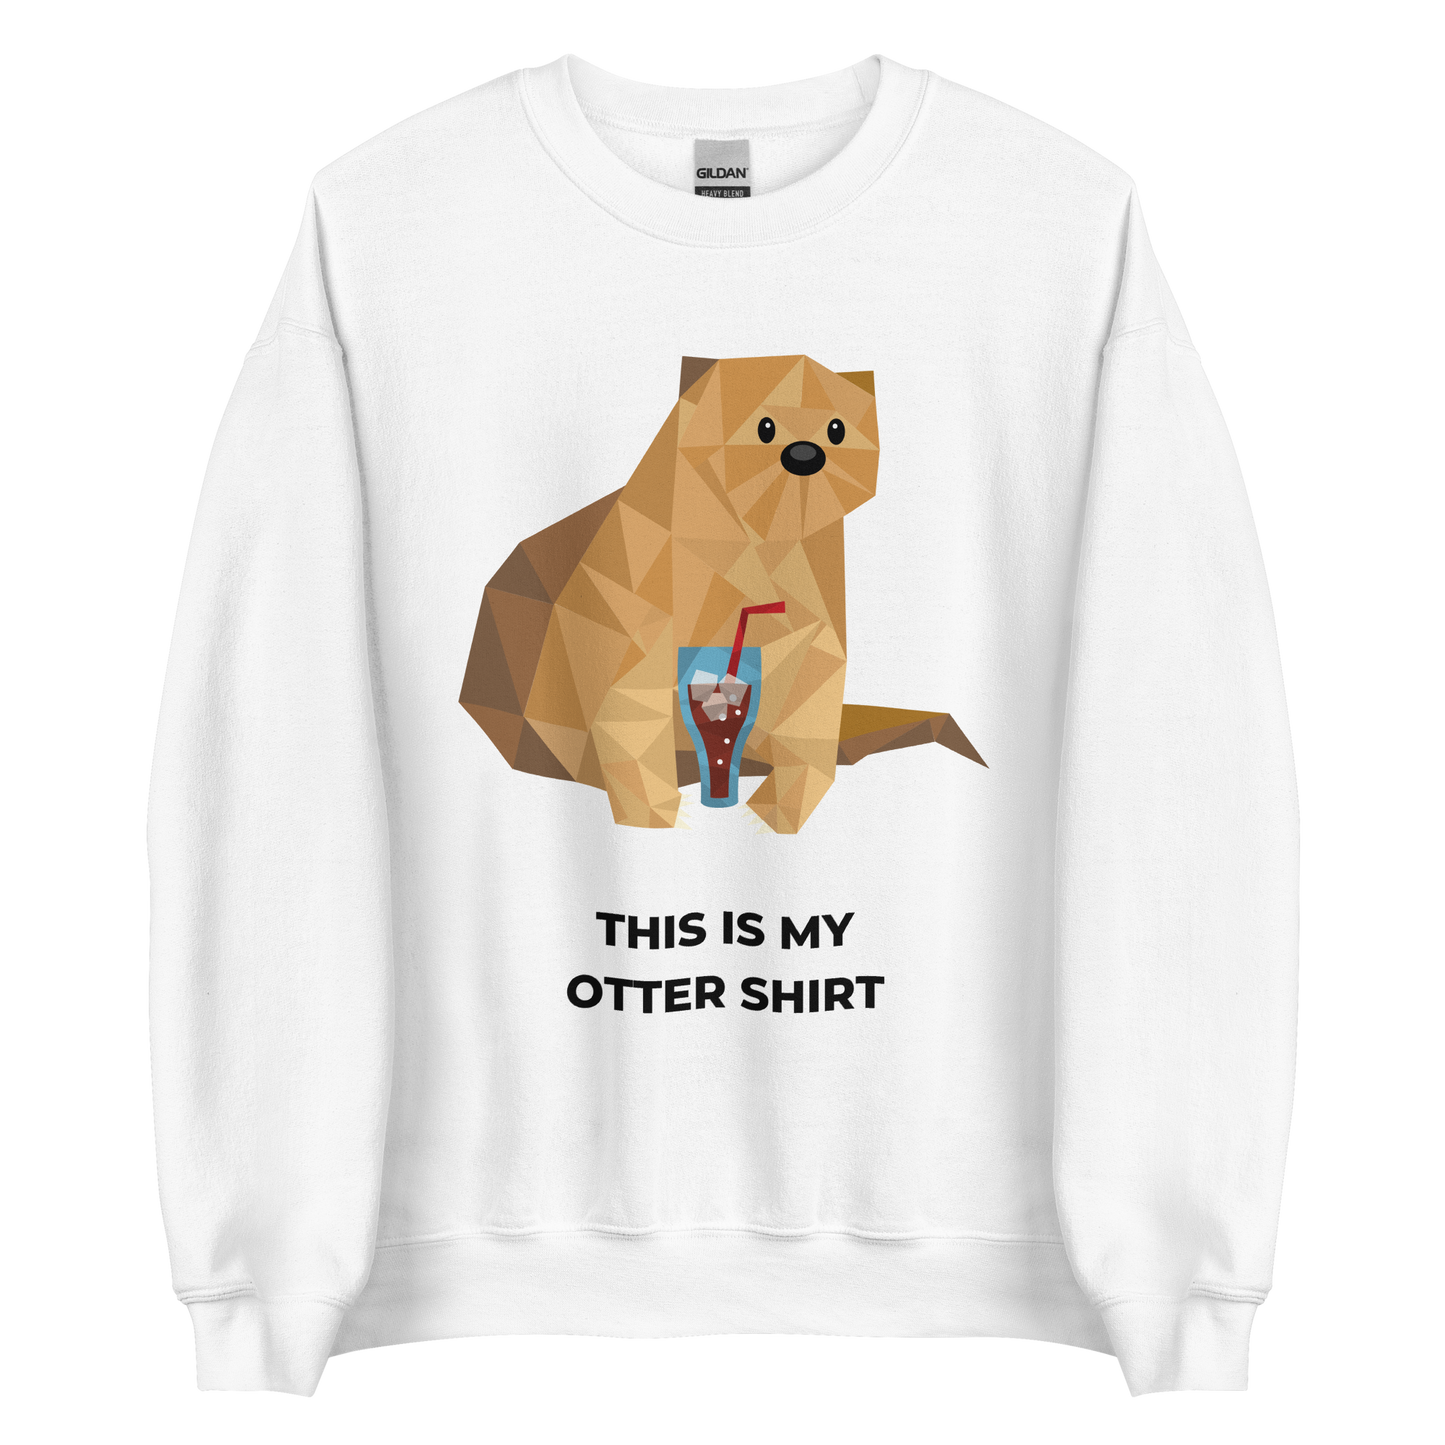 White Otter Sweatshirt featuring an adorable This Is My Otter Shirt graphic on the chest - Funny Graphic Otter Sweatshirts - Boozy Fox